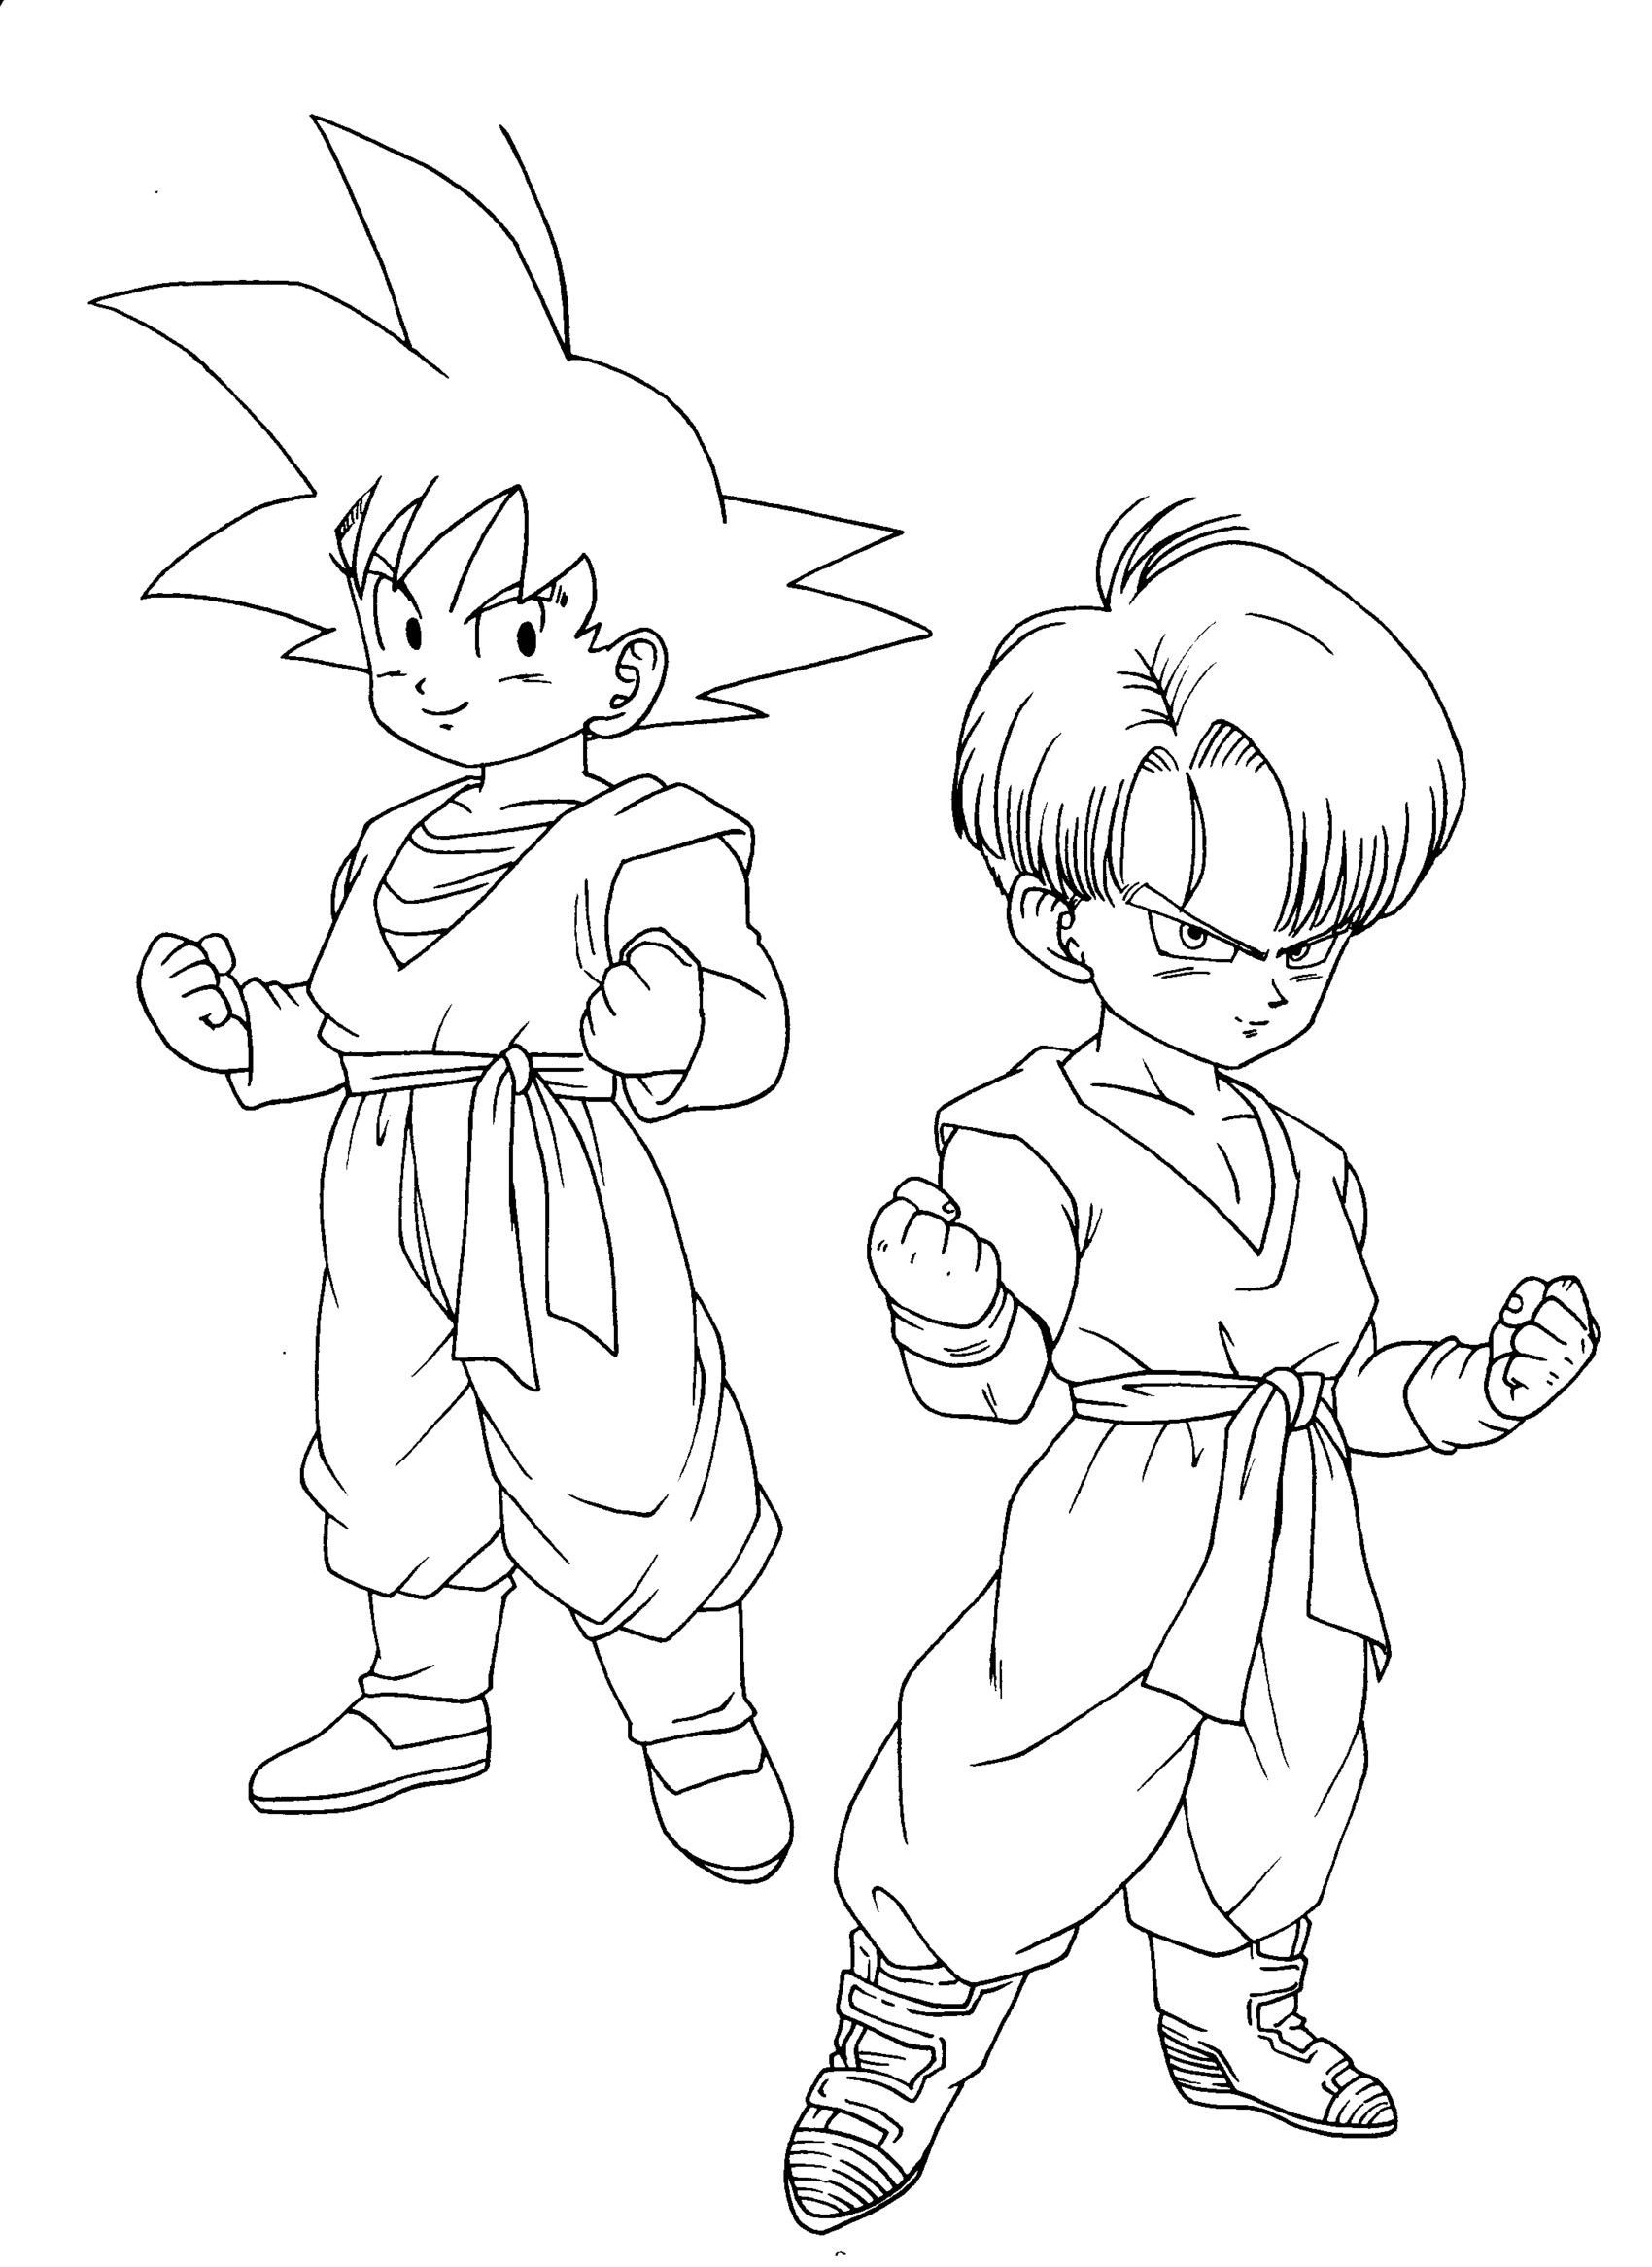 coloriages-dragon-ball-z-13_jpg dans Dragon ball z coloring pages ...